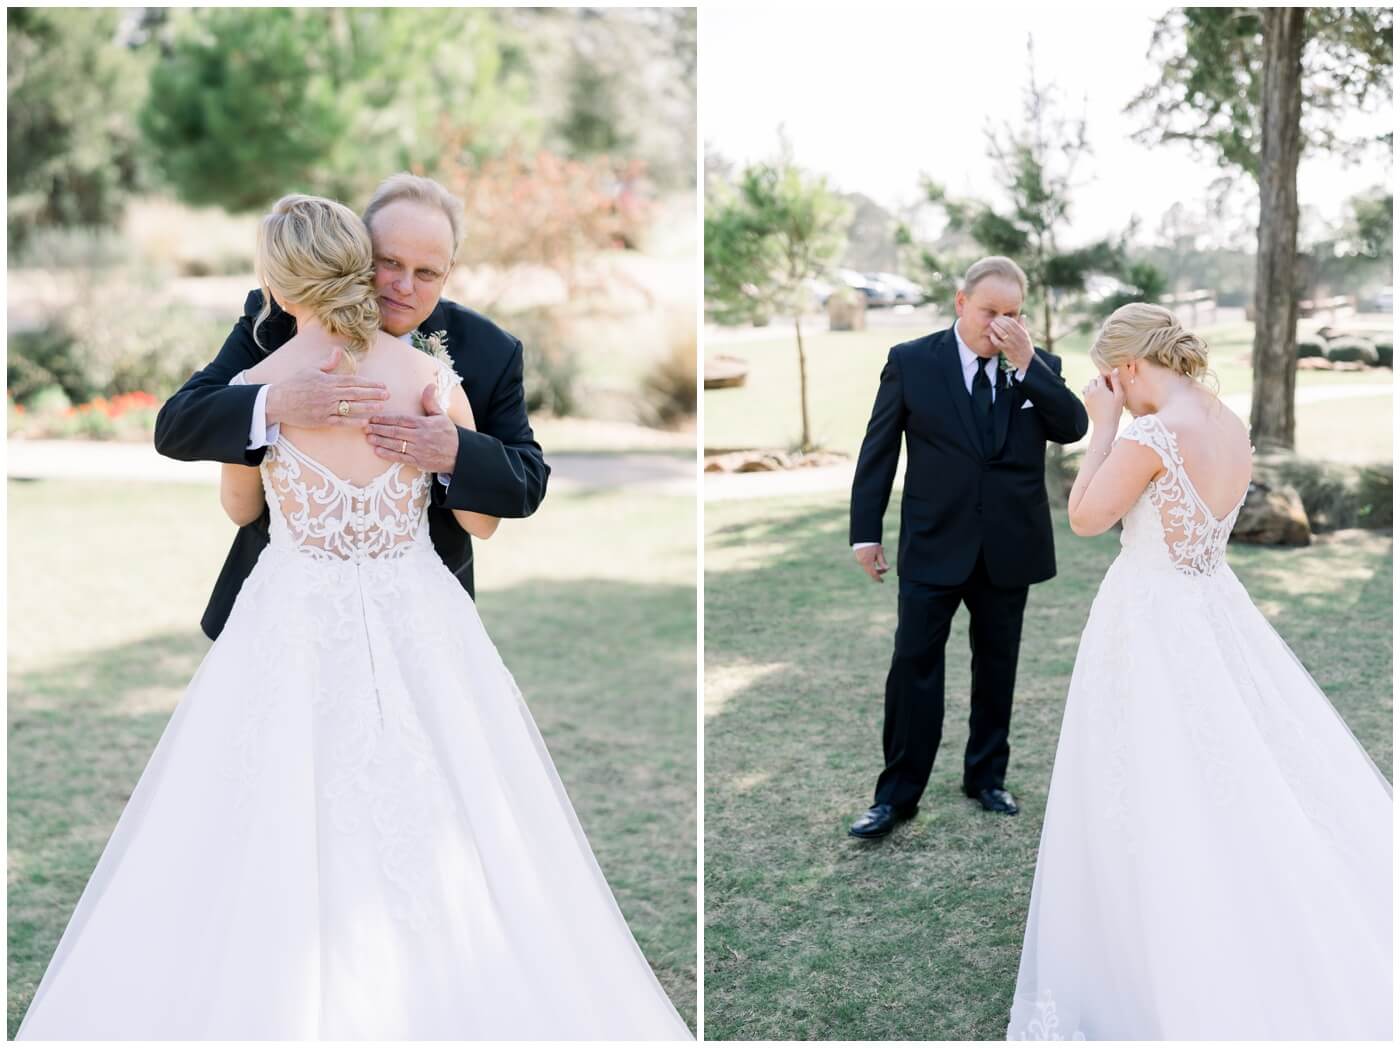 A bride shares a first look with her dad on her wedding day.